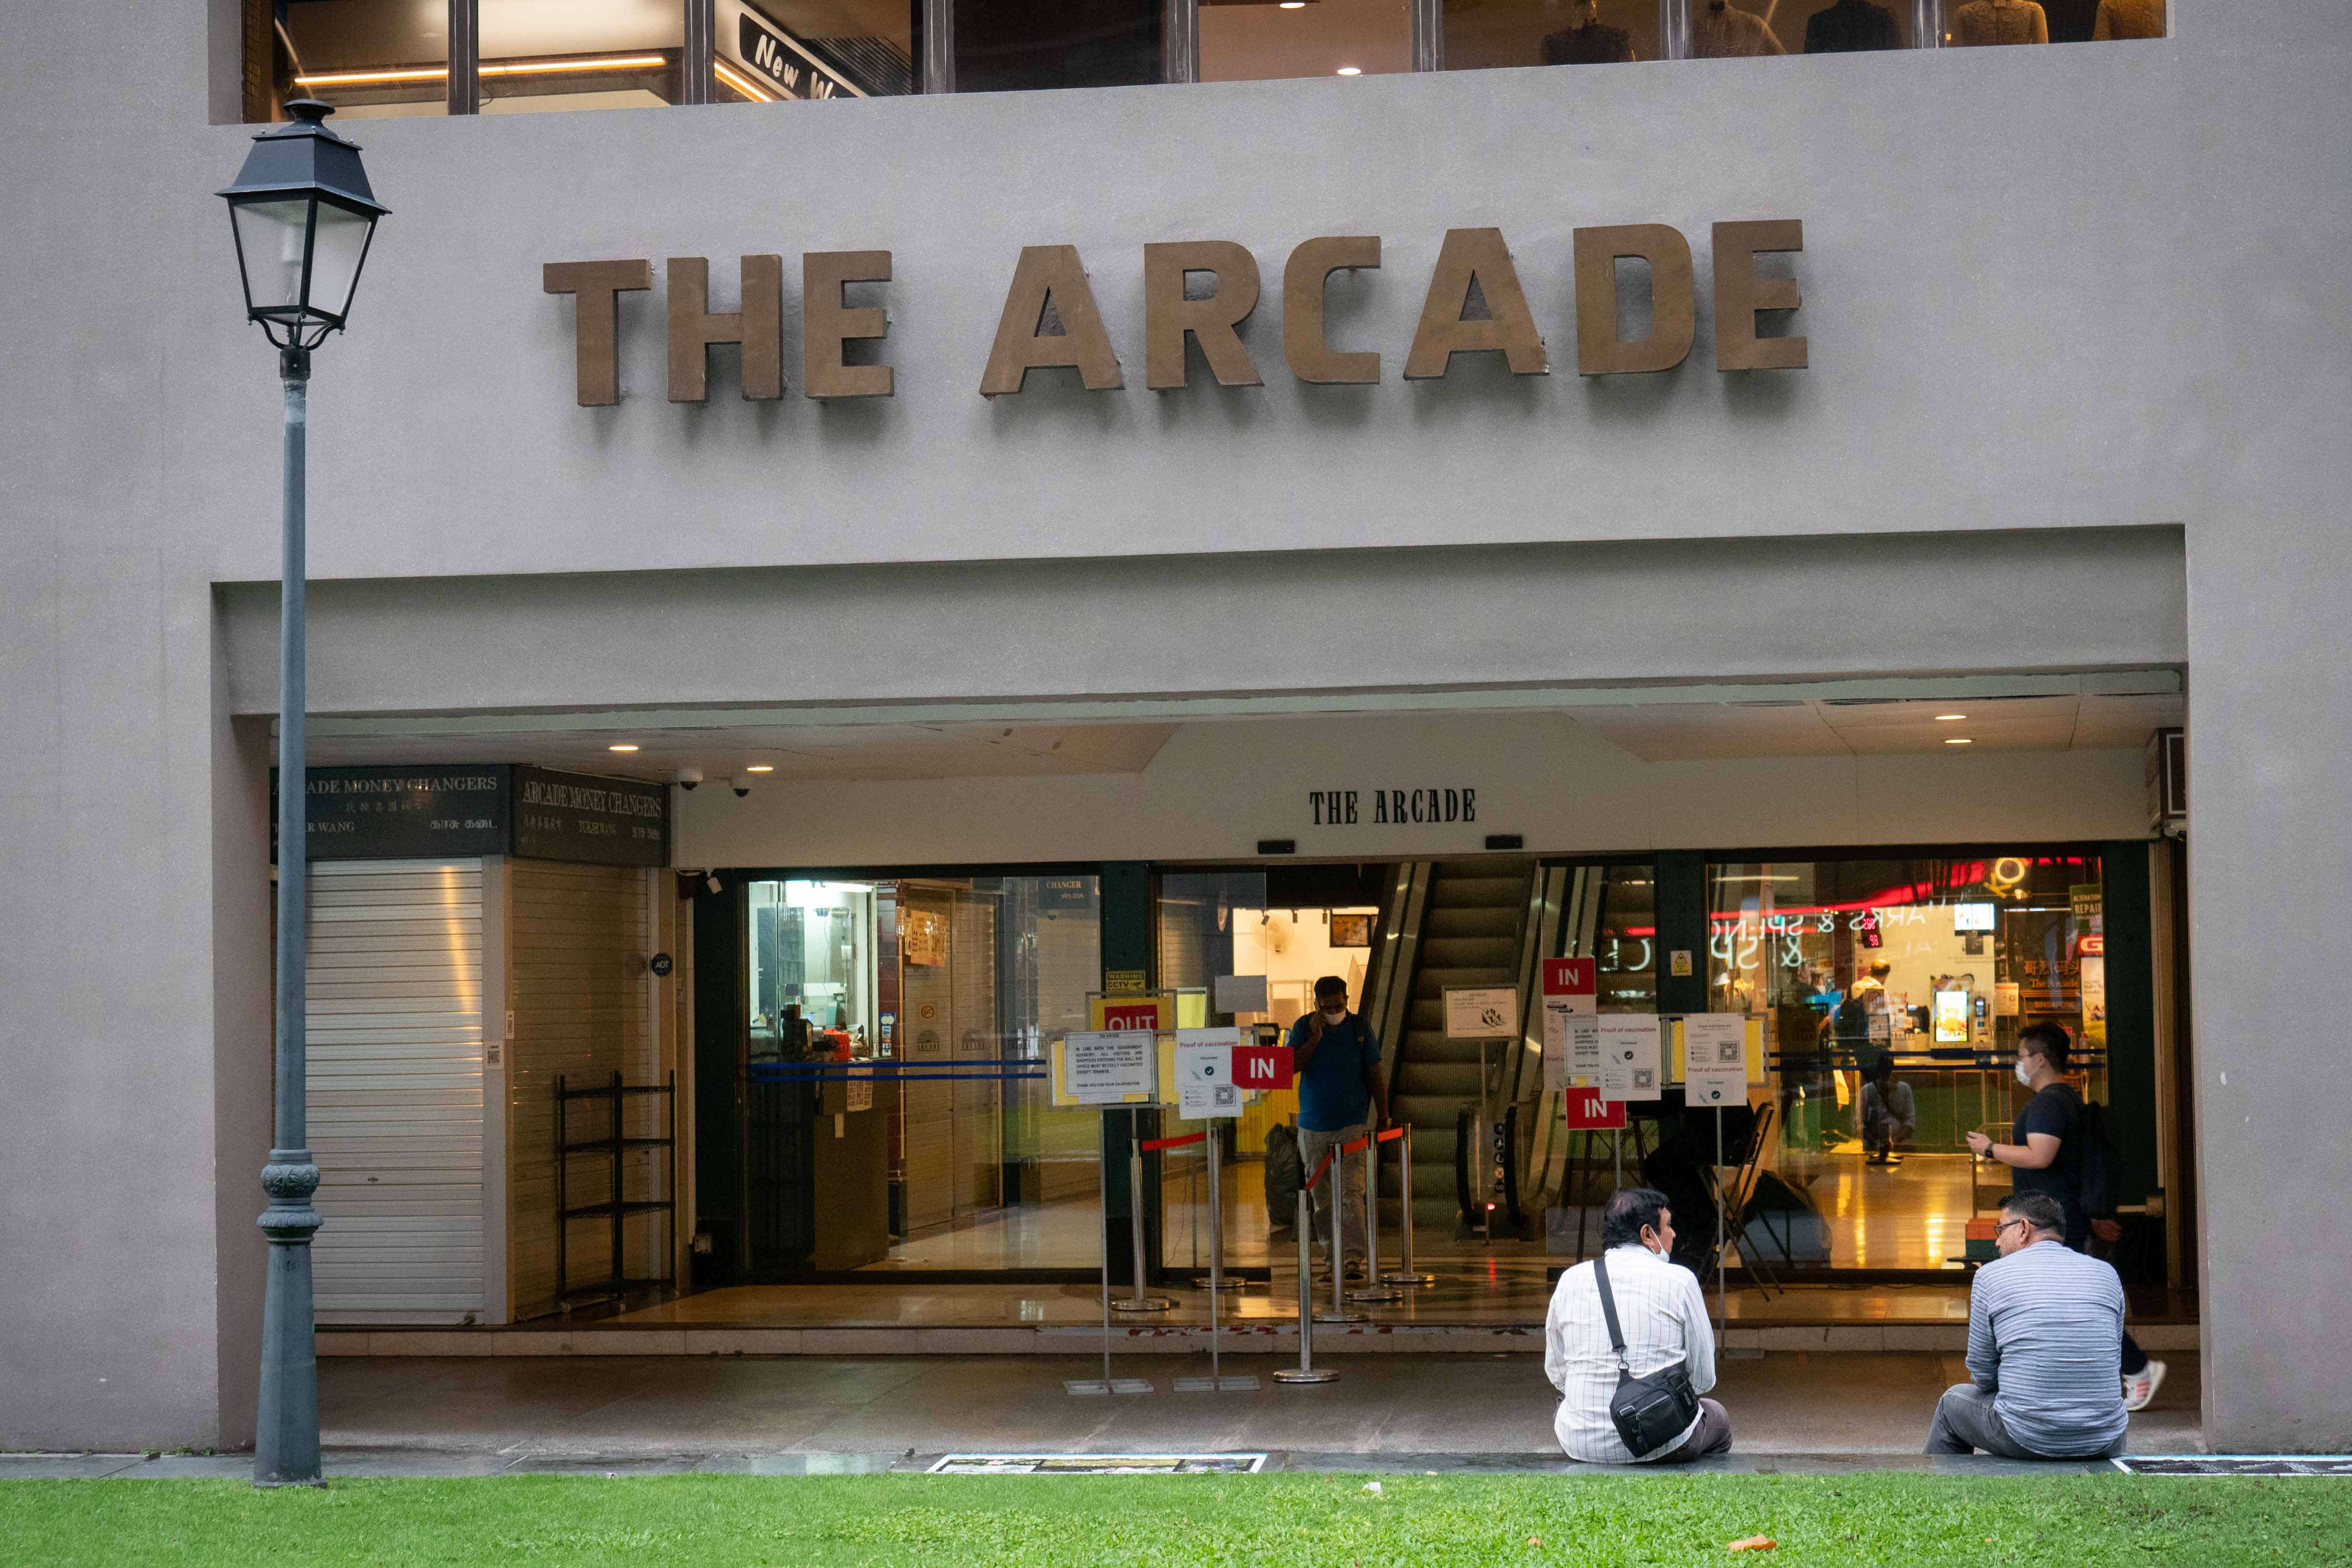 Businesses at The Arcade in Raffles Place said that they were affected by a power failure from the afternoon of April 4 to the evening of April 5, 2022.